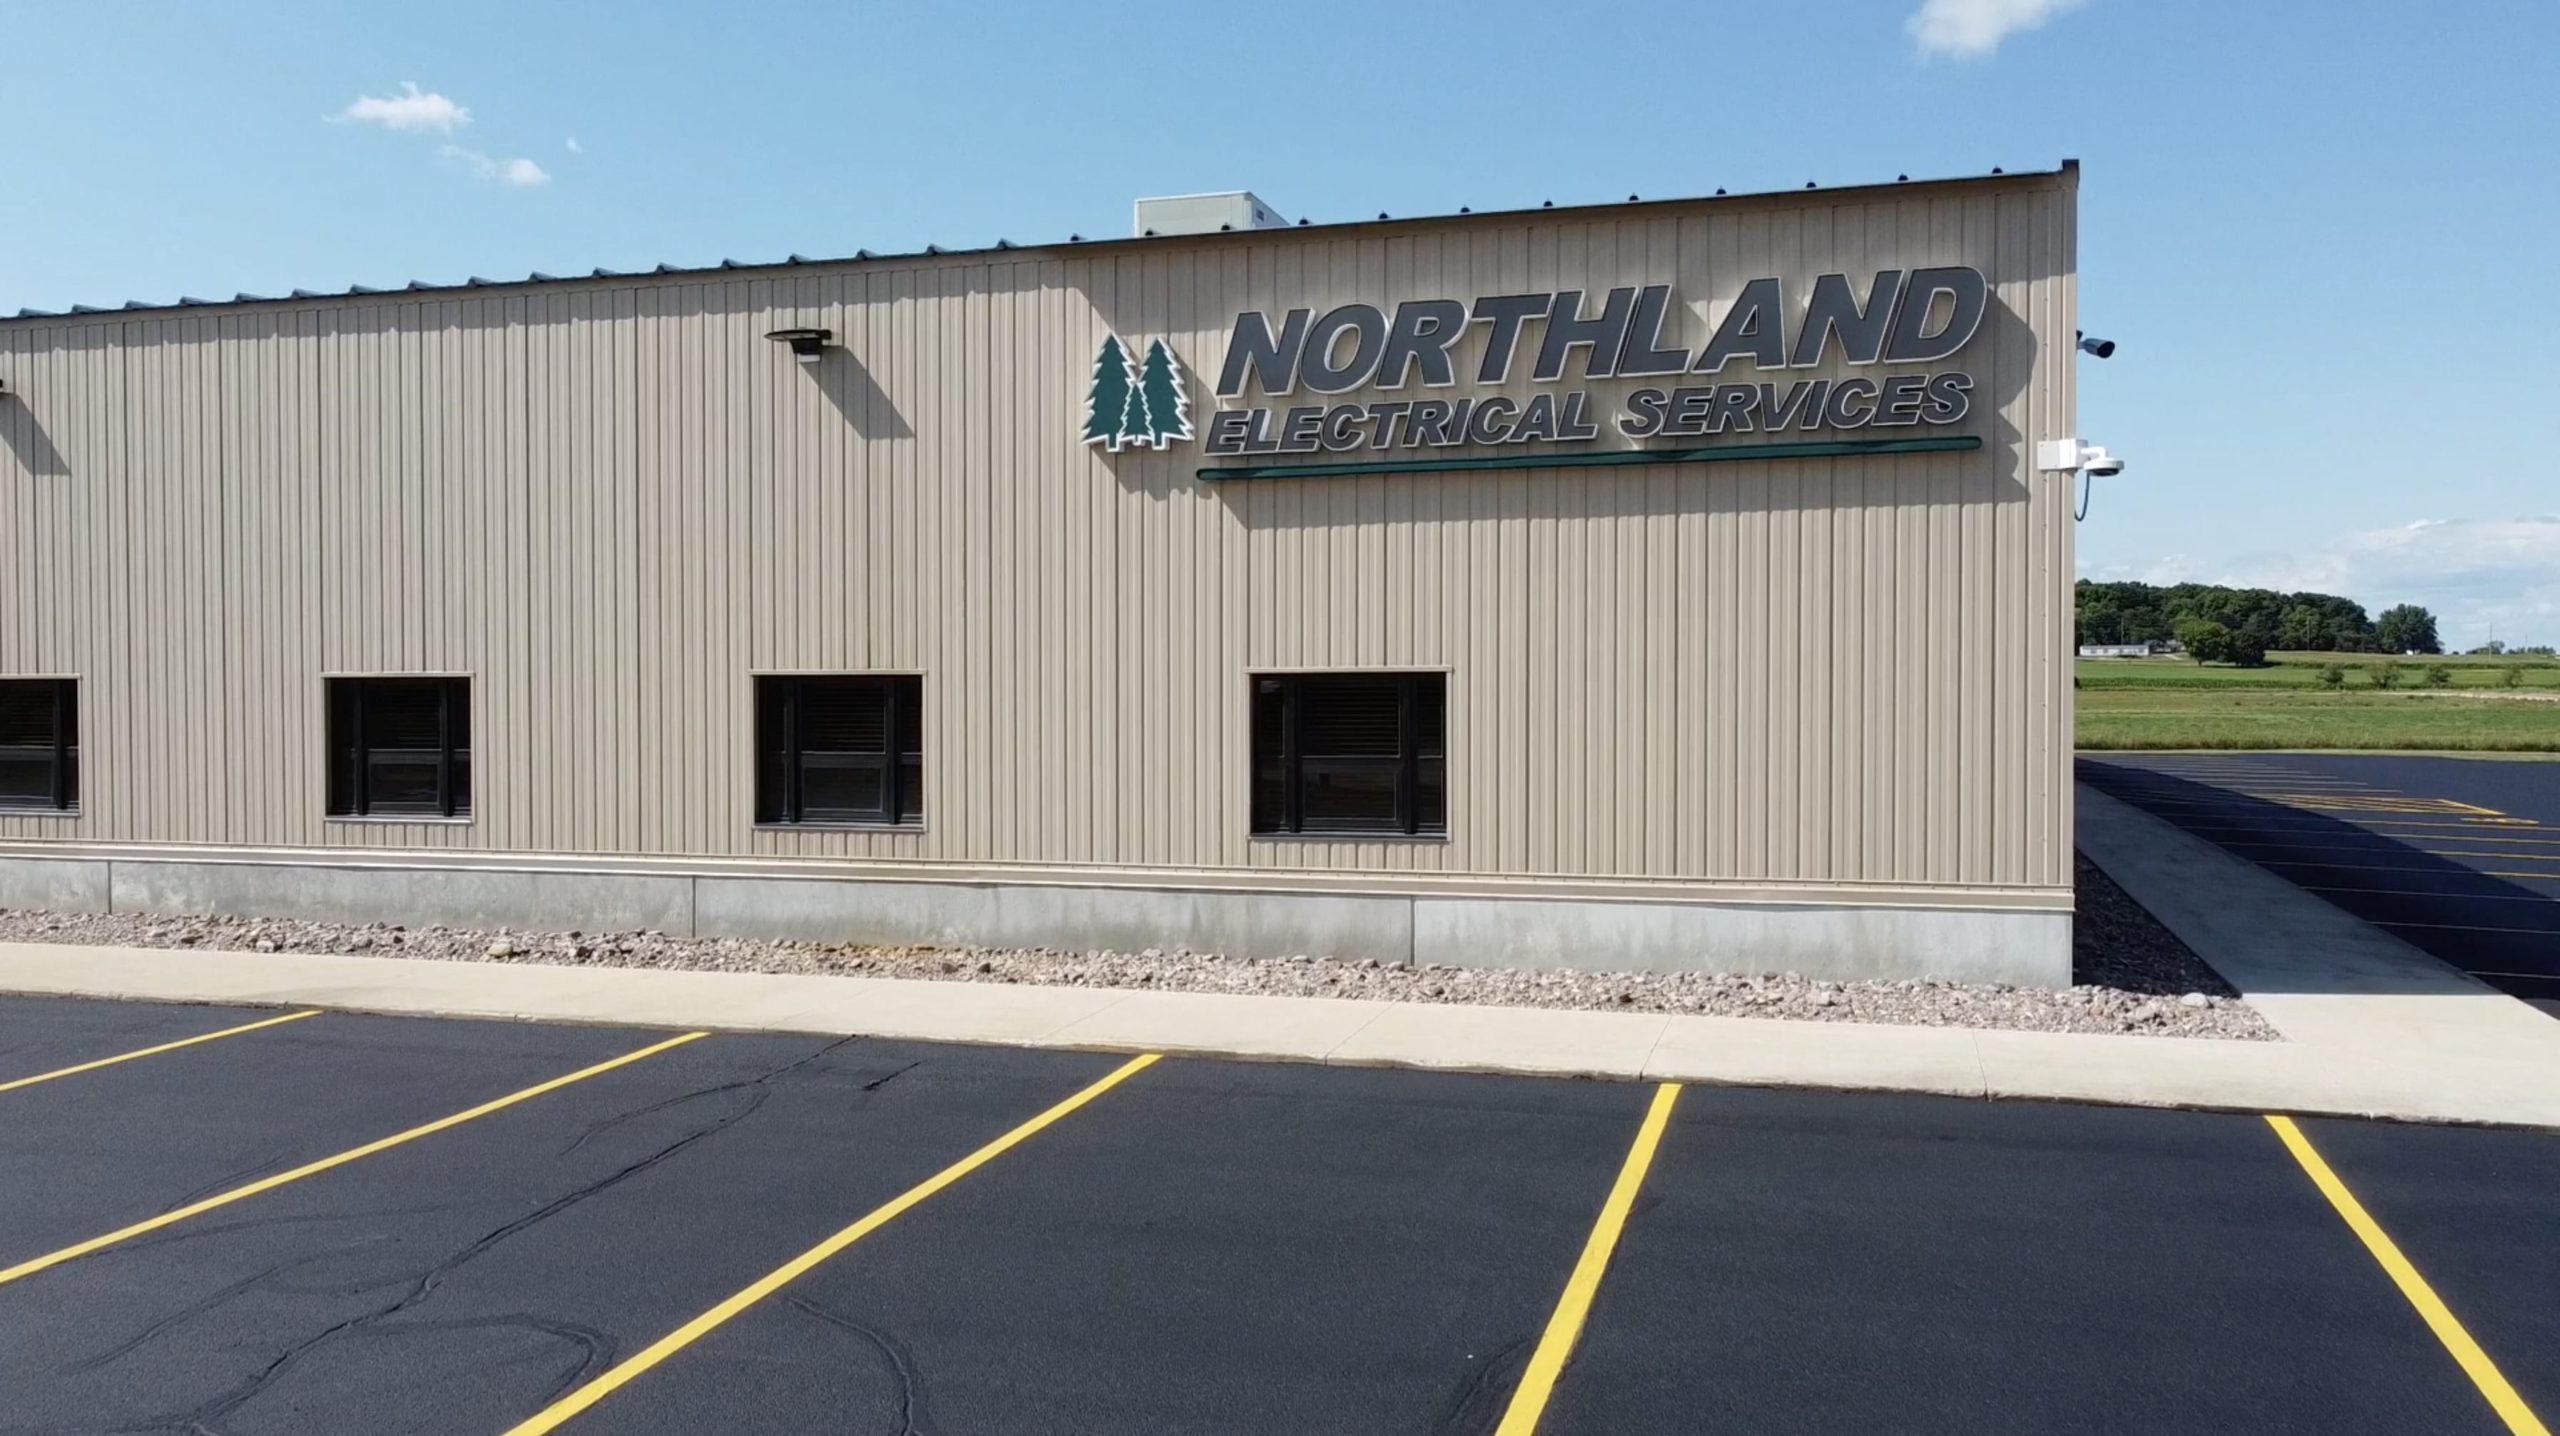 Northland Electrical Services